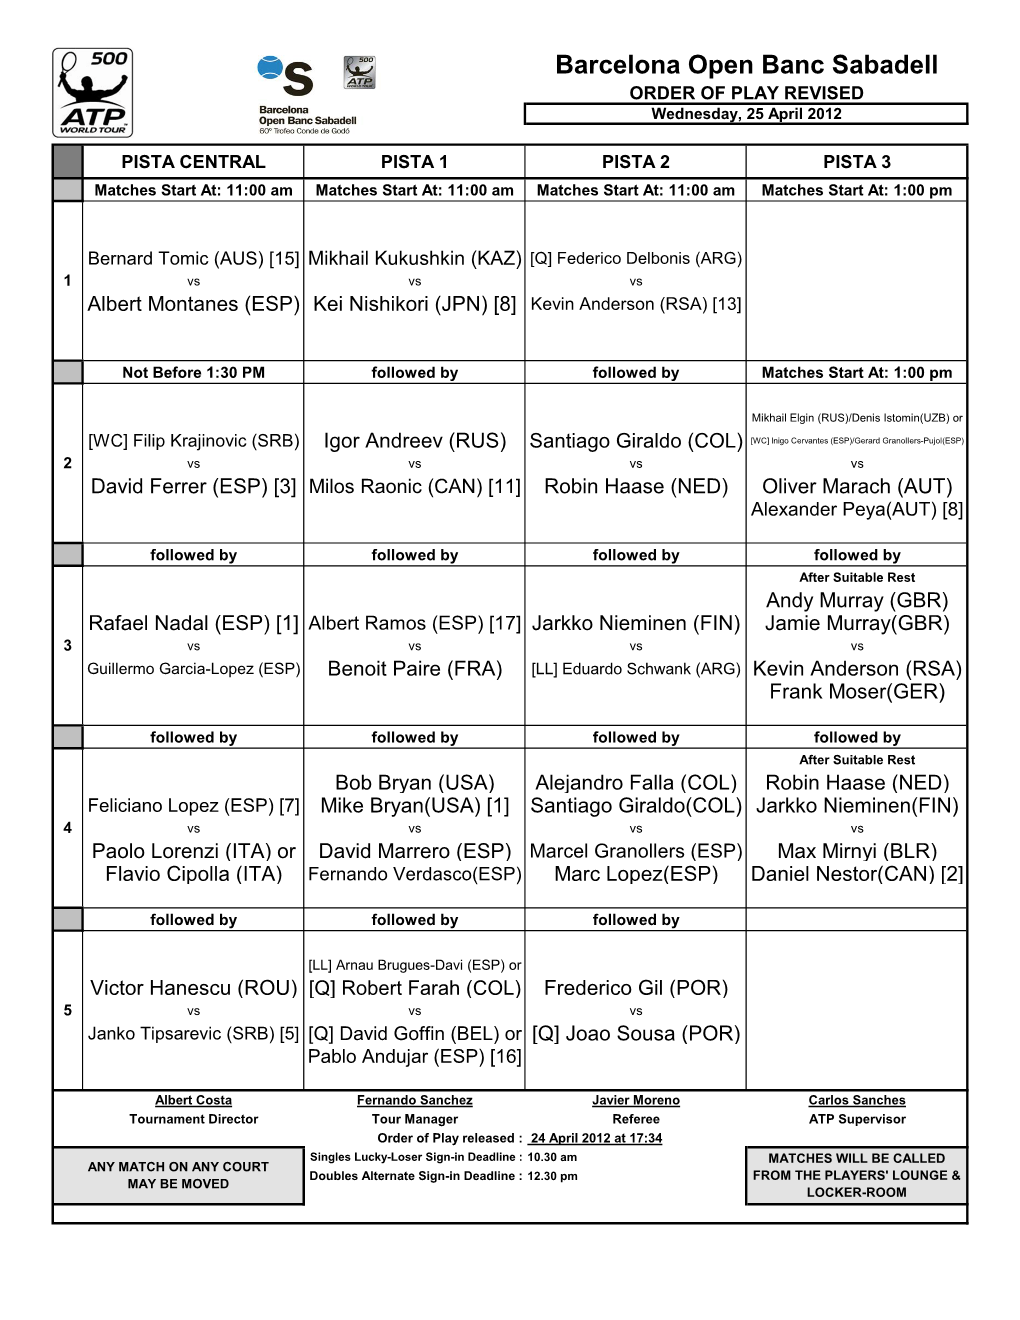 Barcelona Open Banc Sabadell ORDER of PLAY REVISED Wednesday, 25 April 2012